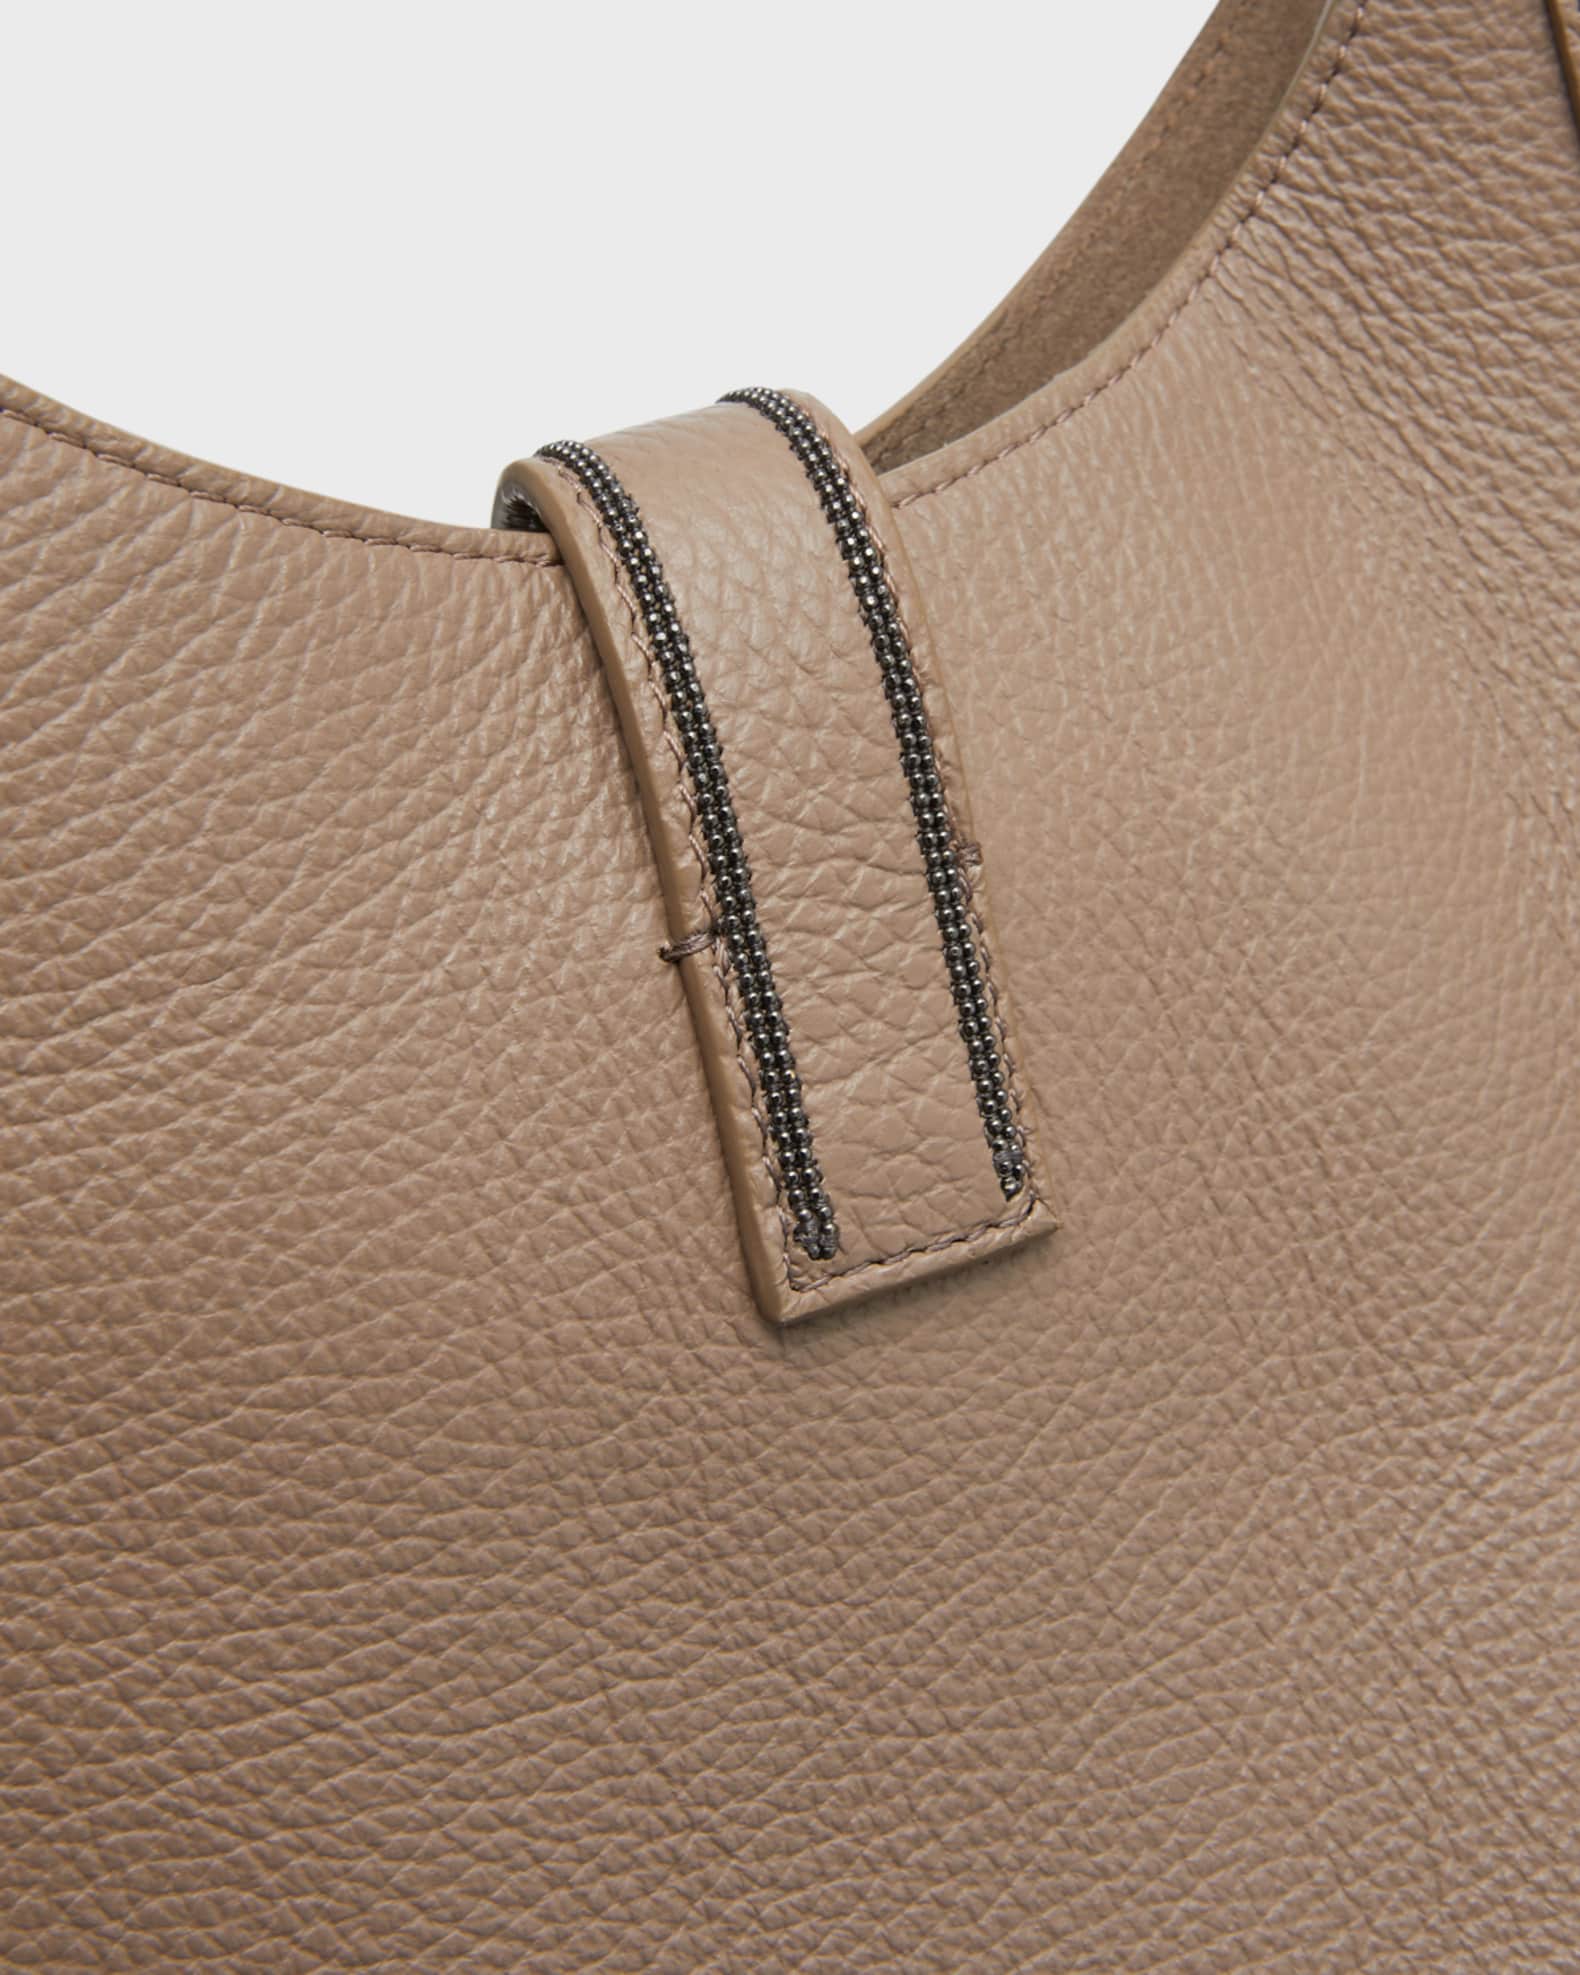 Neiman Marcus - You won't want to put this Brunello Cucinelli tote